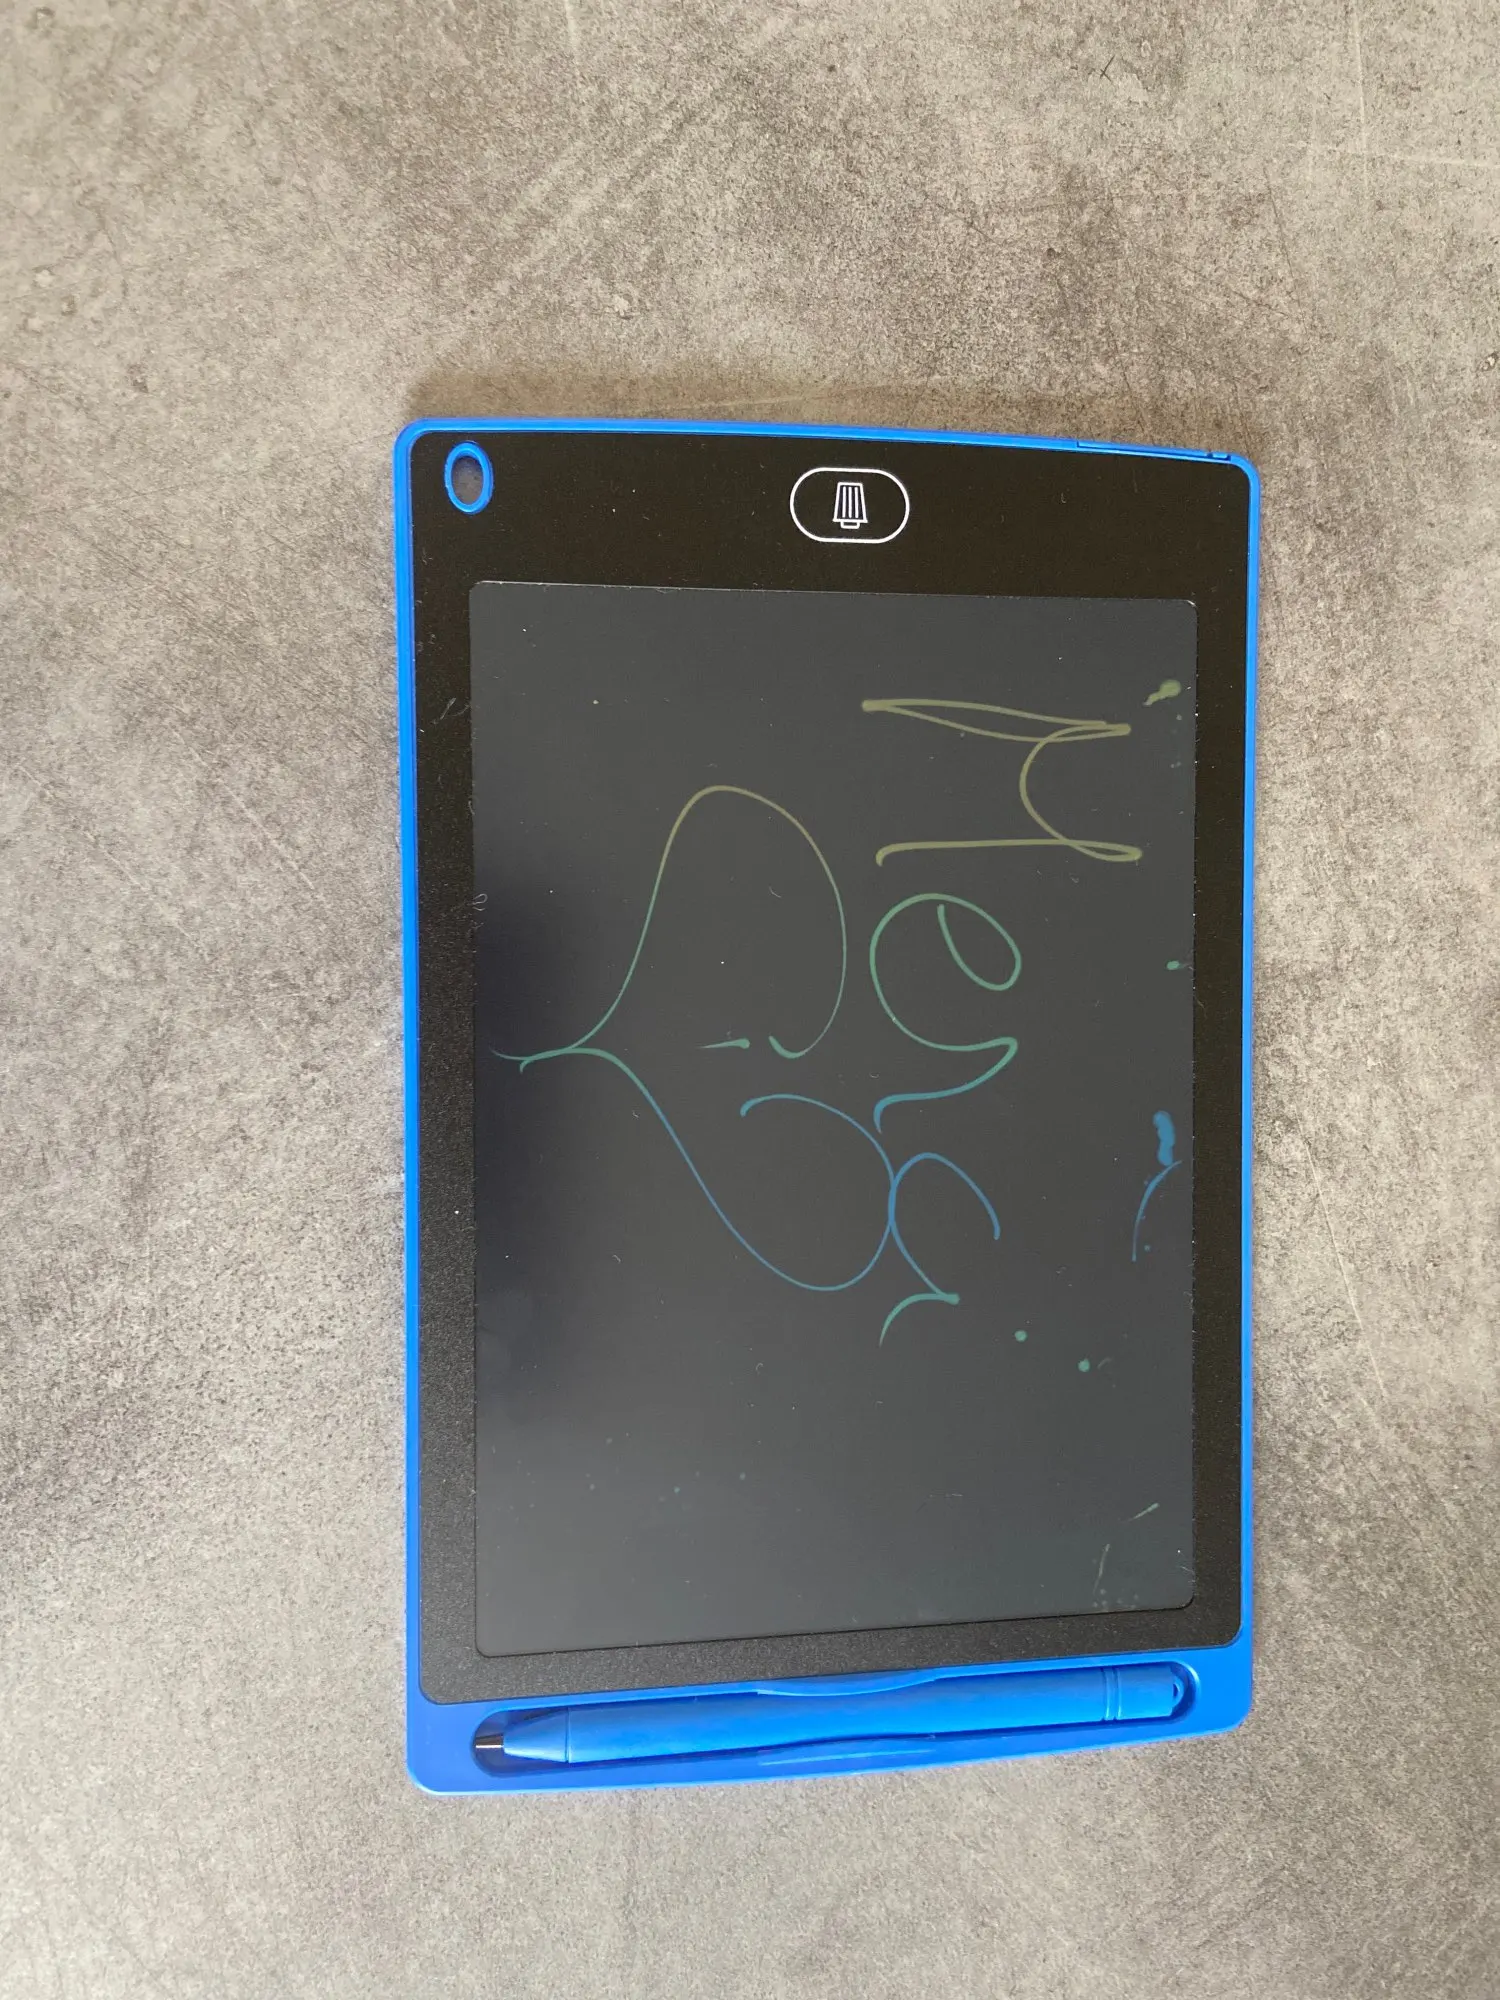 Magic Drawing Board - A Fun LCD Writing Tablet for Kids to Explore Their Creativity with Handwriting, Drawing and Painting photo review